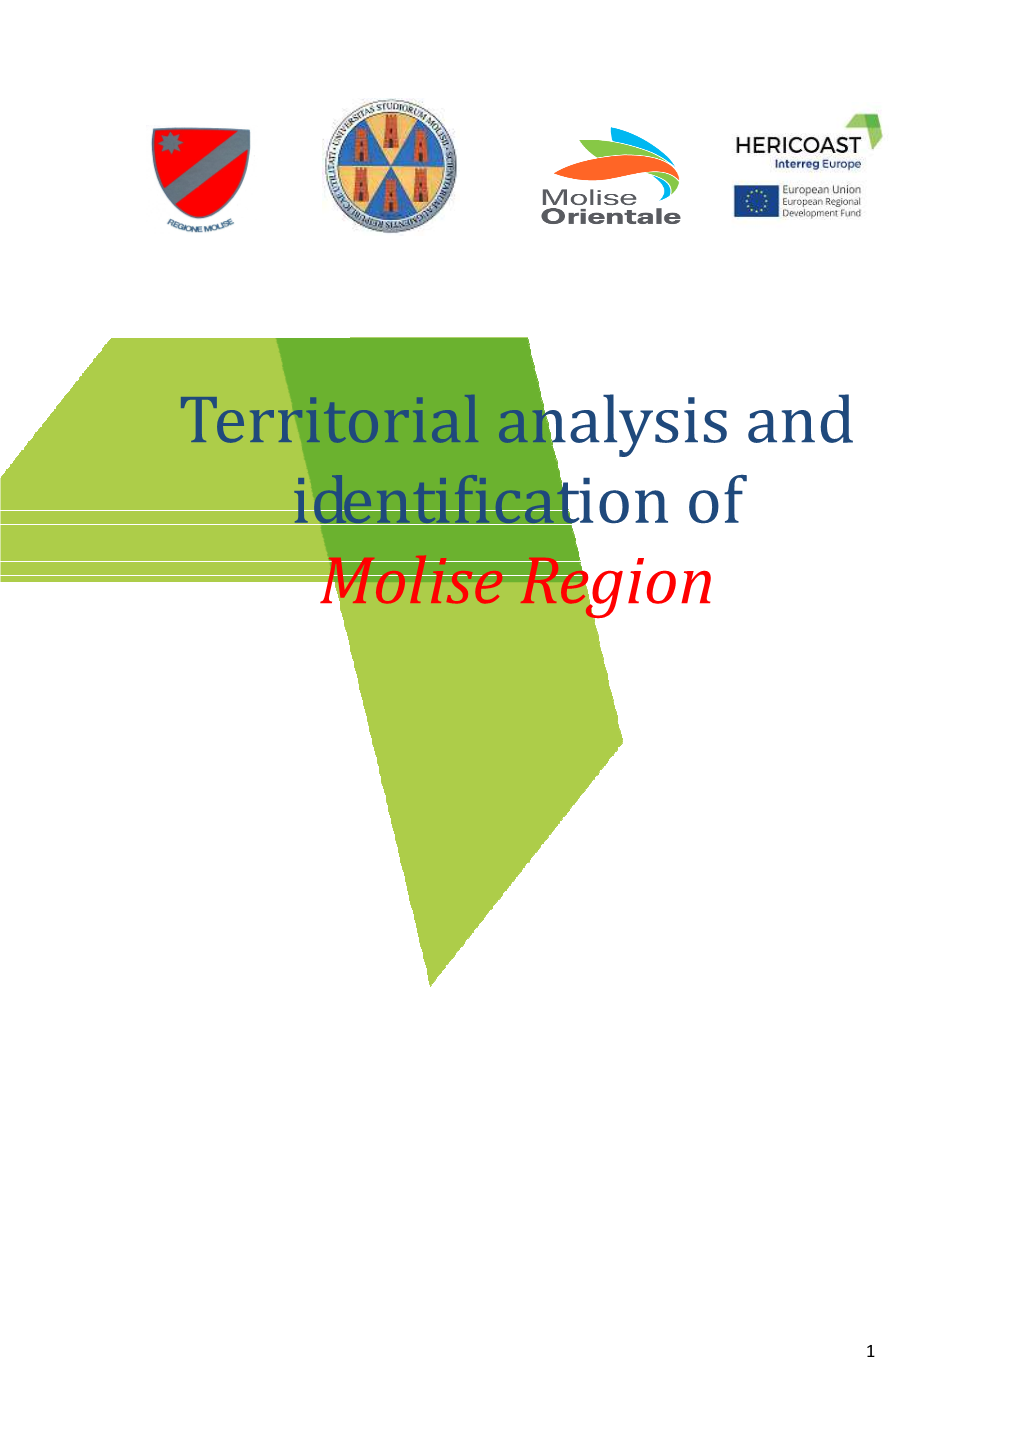 Territorial Analysis and Identification Template Molise Region FINAL